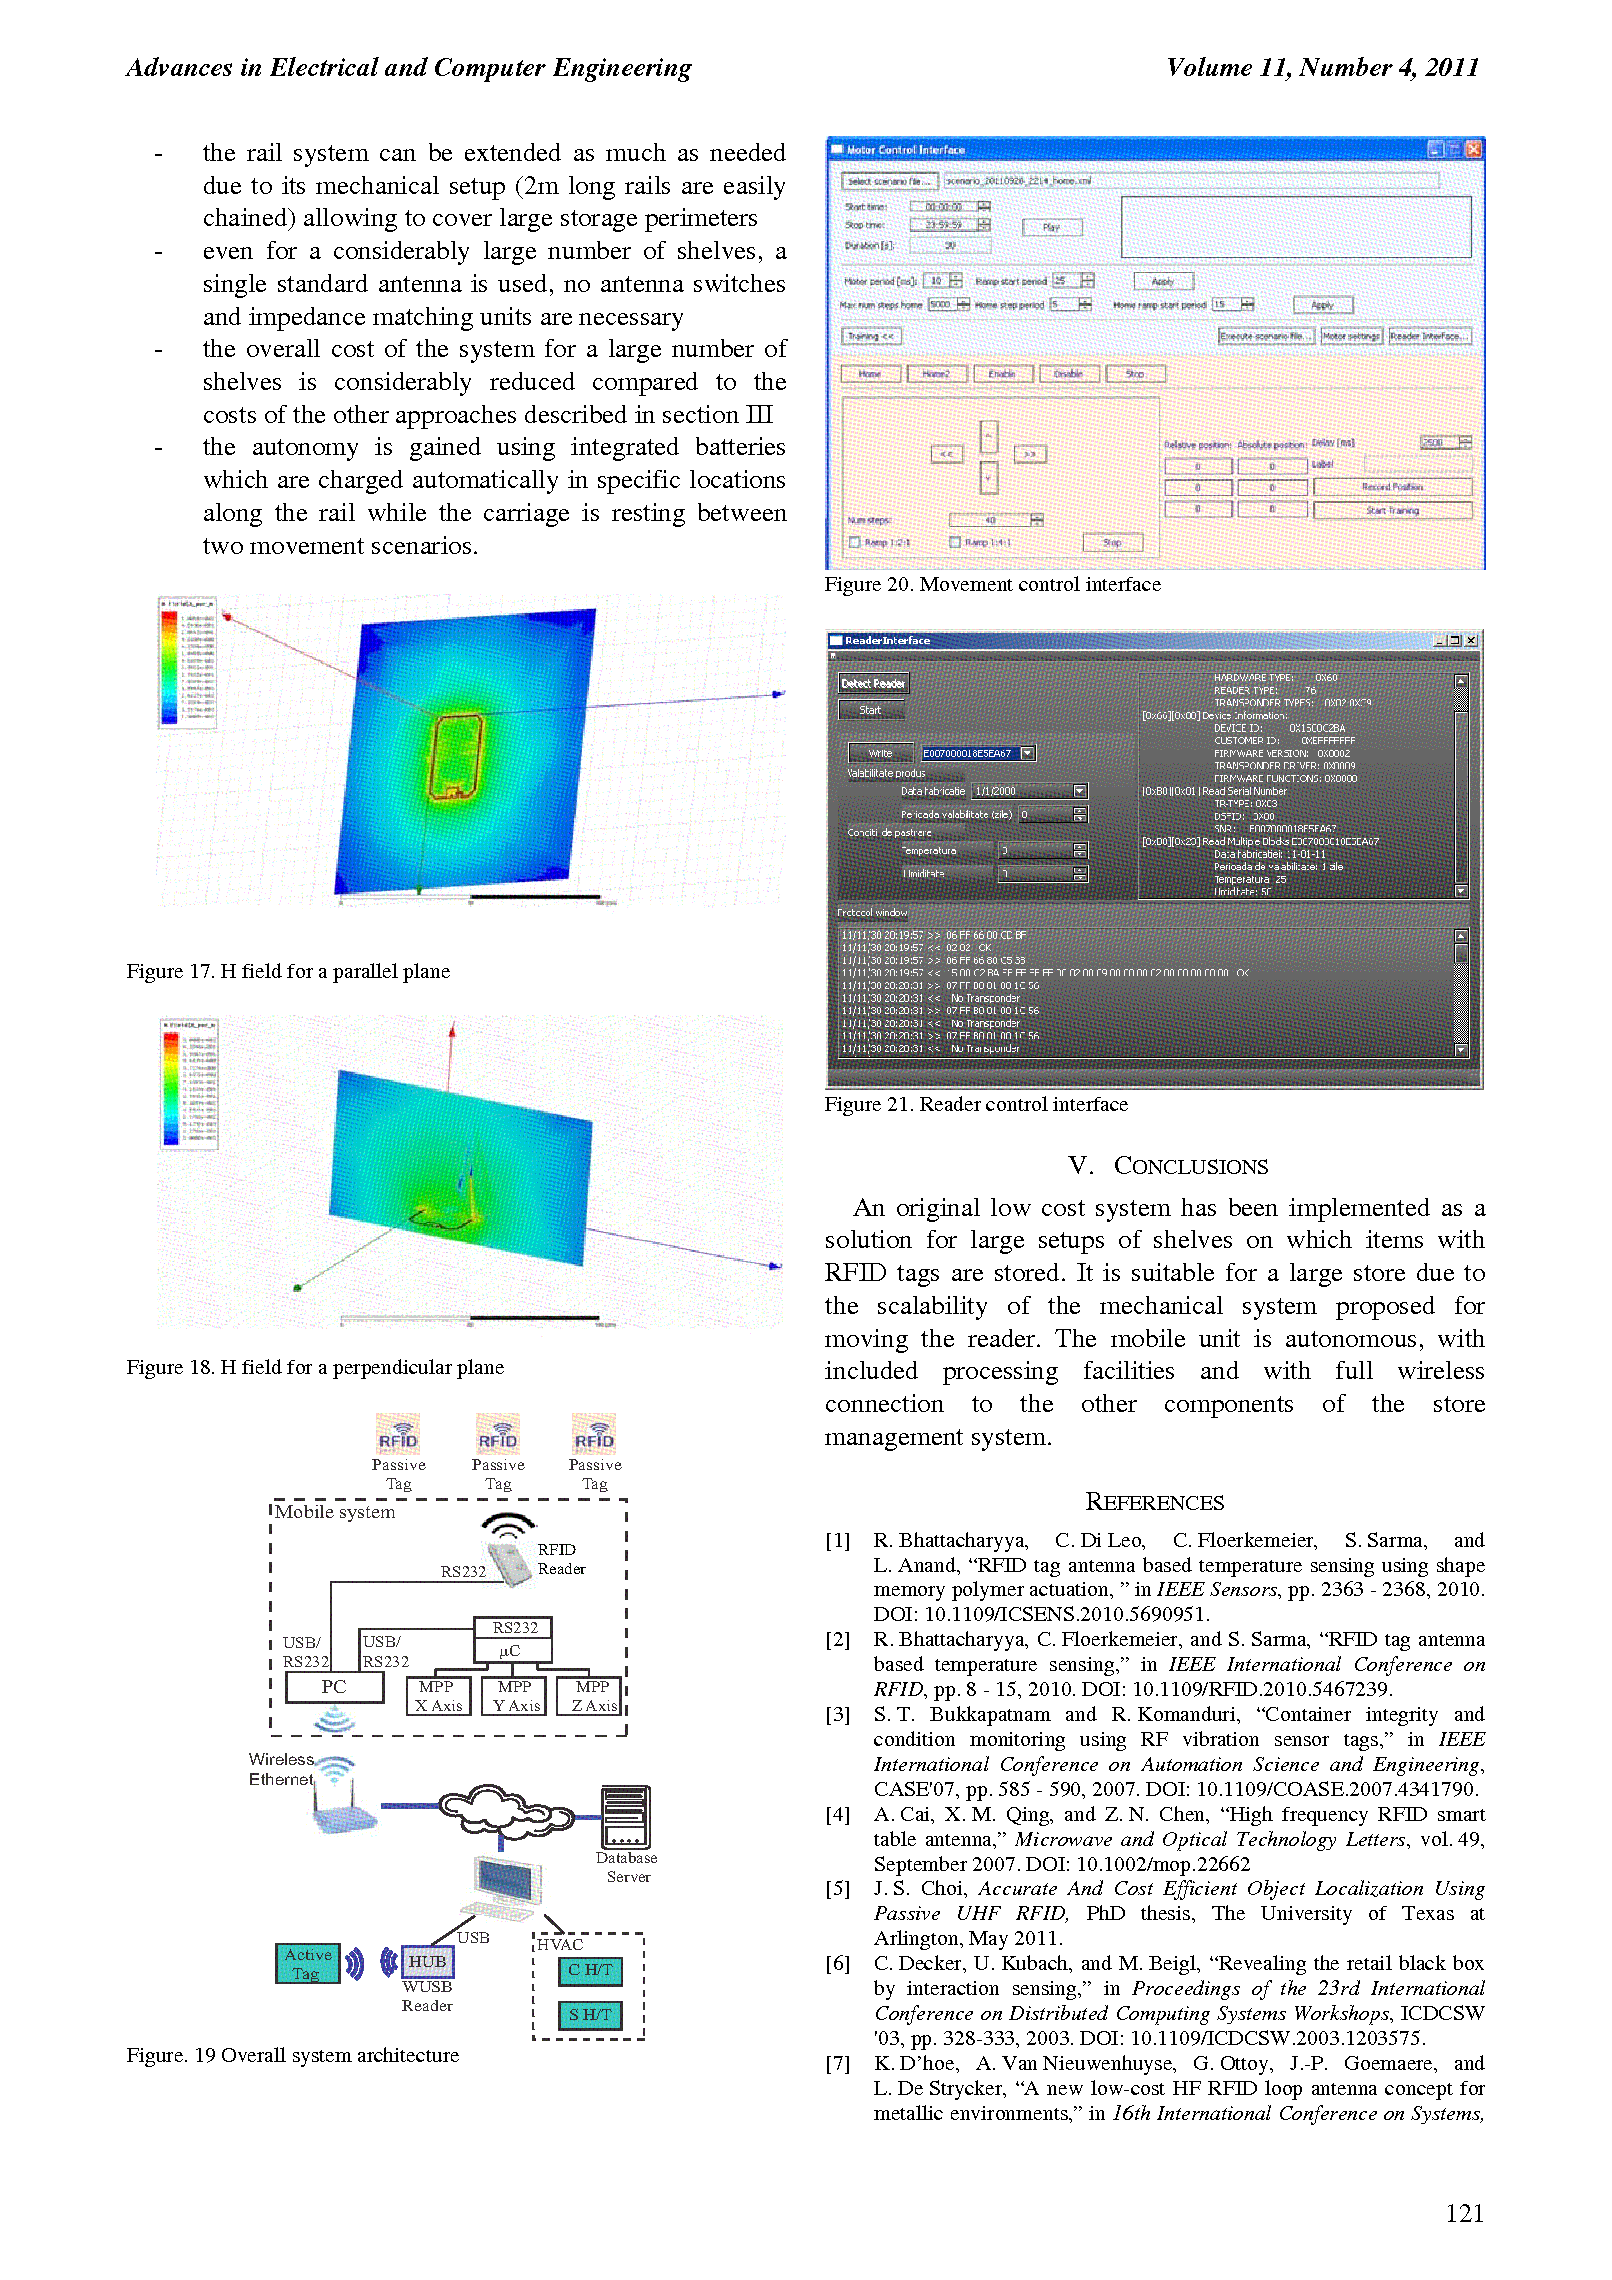 PDF Quickview for paper with DOI:10.4316/AECE.2011.04019